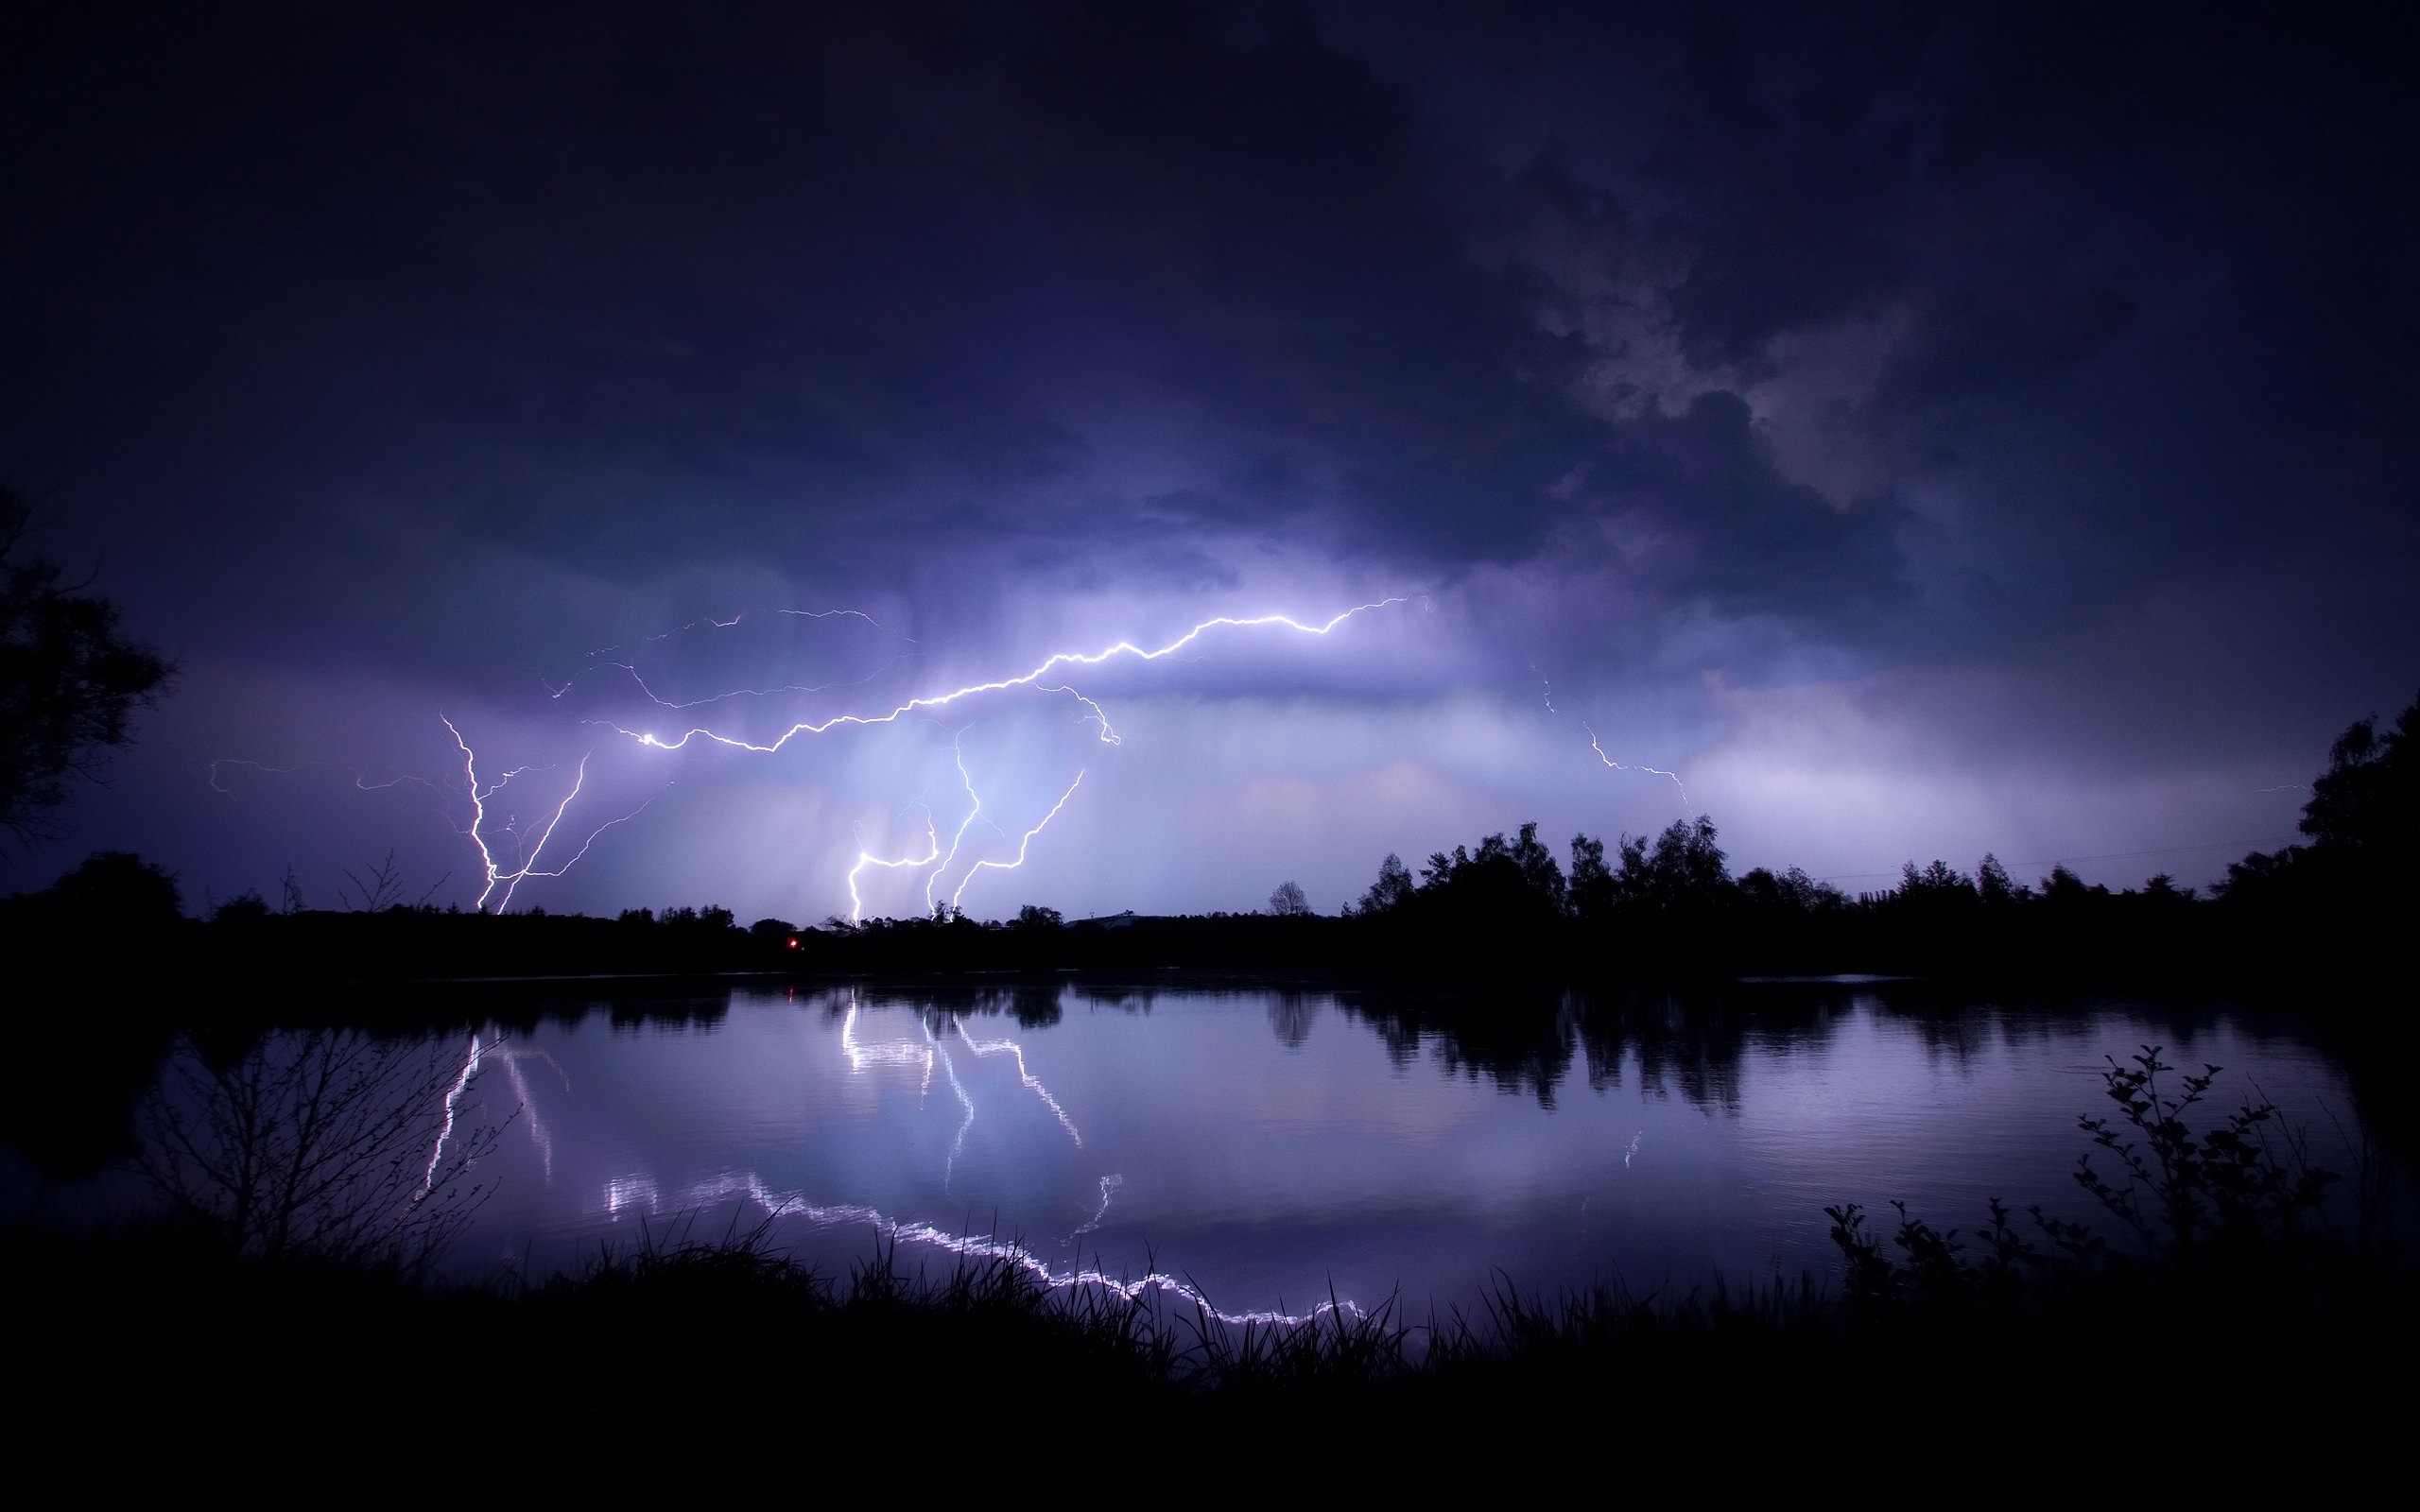 landscapes, Nature, Trees, Forest, Lakes, Reflection, Lightning, Rain, Storm, Night, Water, Contrast, Bright, Light, Scenic Wallpaper